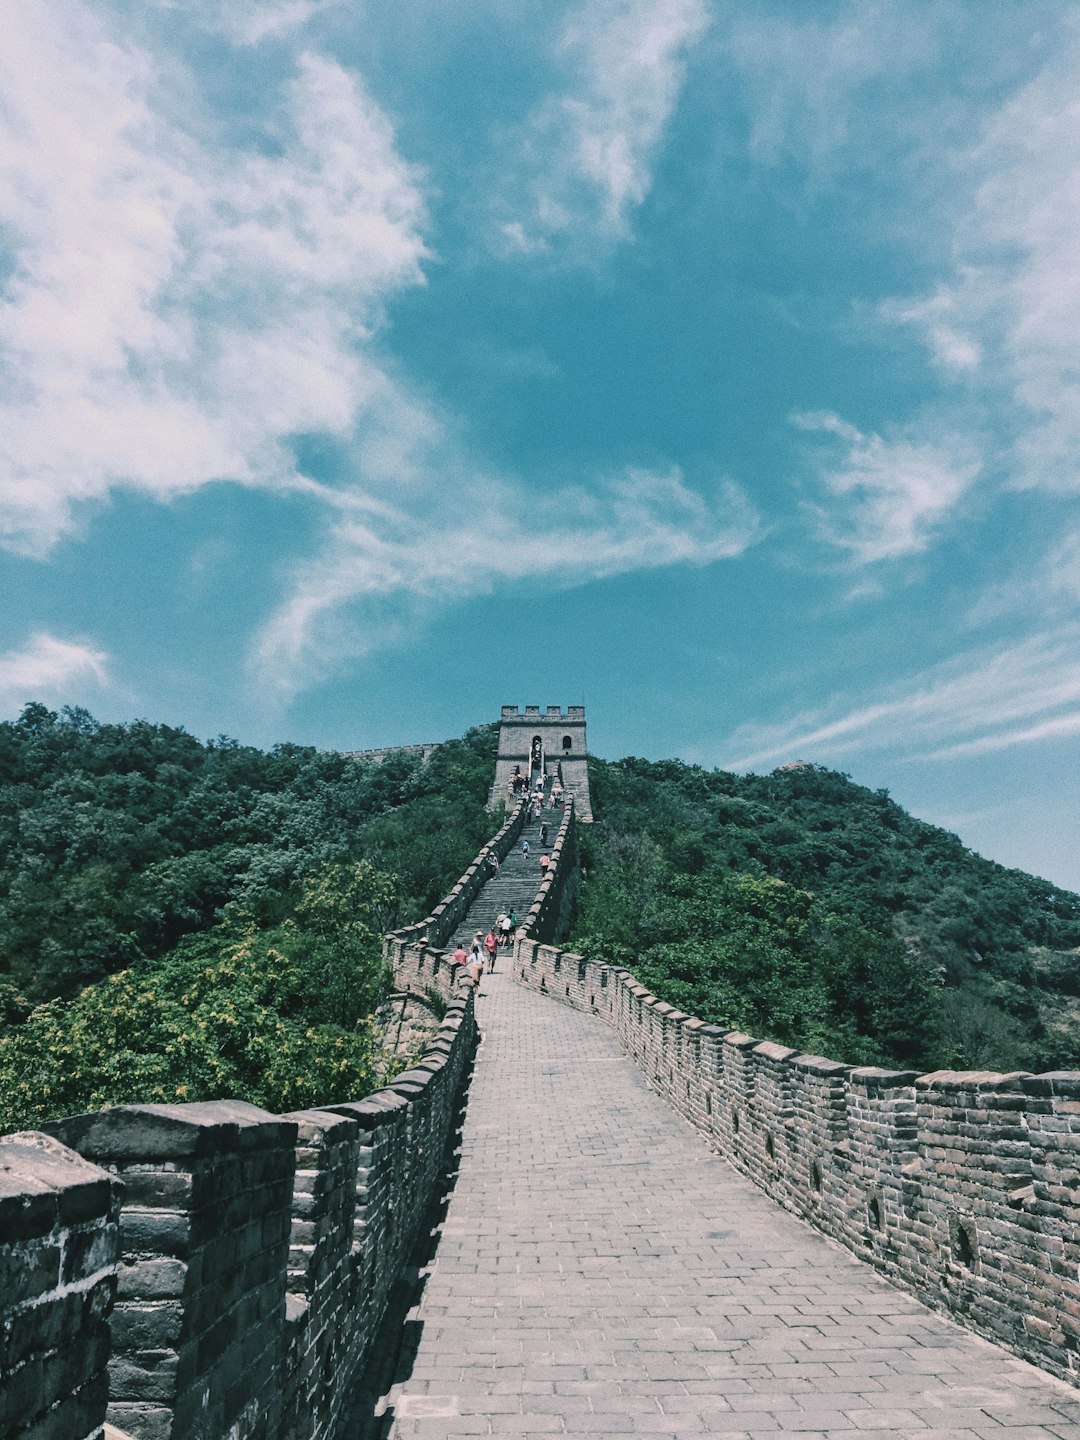 Travel Tips and Stories of Mutianyu in China